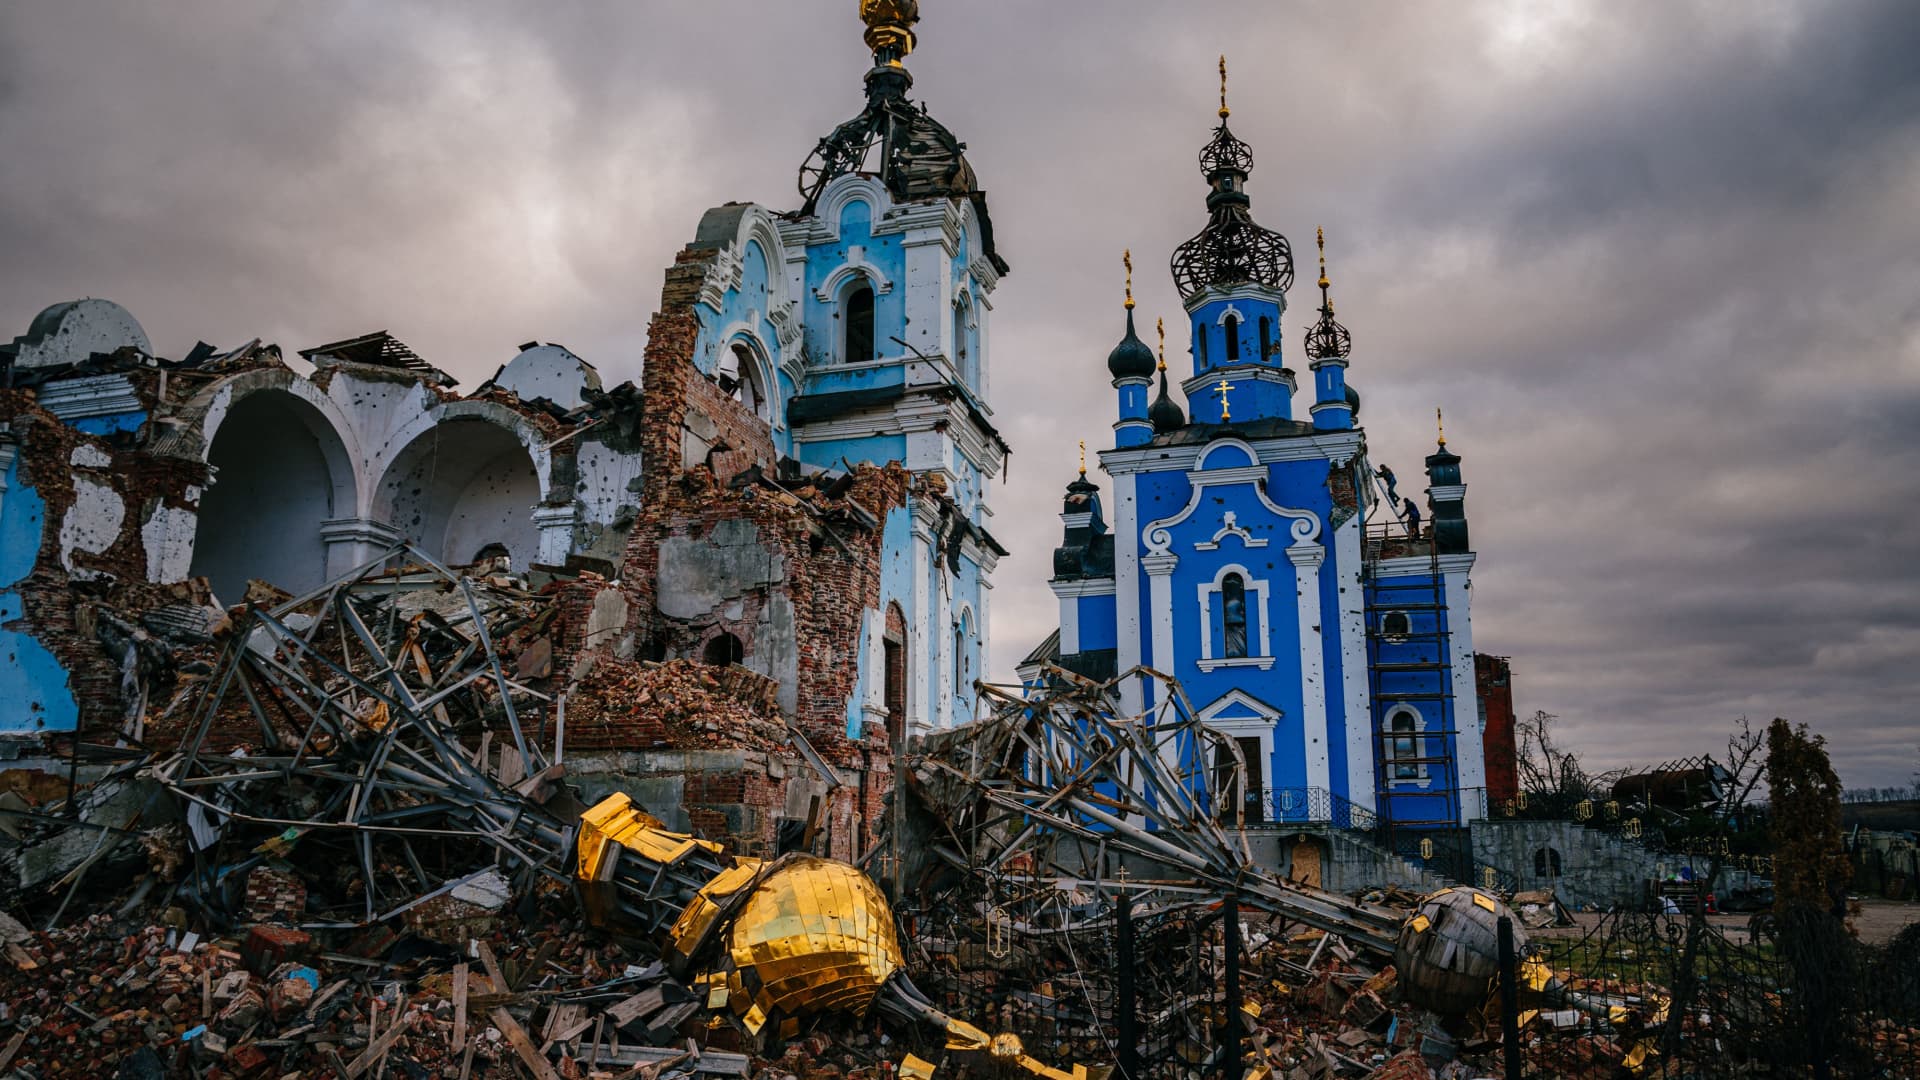 Construction workers climb onto the roof of a destroyed church in the village of Bohorodychne, Donetsk region on January 4, 2023, amid the Russian invasion of Ukraine.